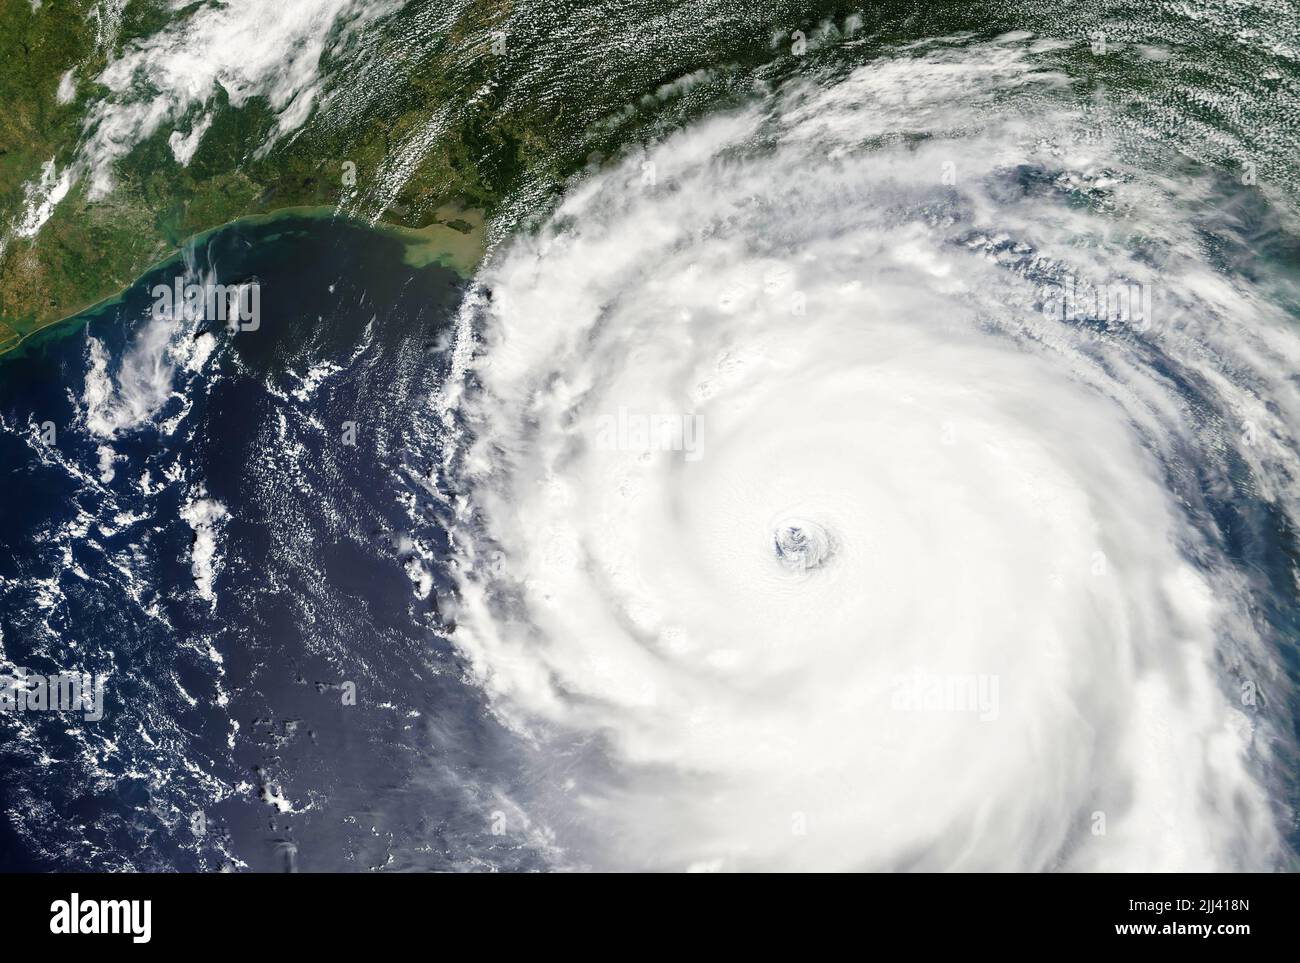 High resolution weather satellite image of Hurricane Katrina, a devastating category 5 storm, in the Gulf of Mexico on August 28, 2005, shortly before making landfall in the New Orleans, Louisiana area early in the morning on August 29. (USA) Stock Photo